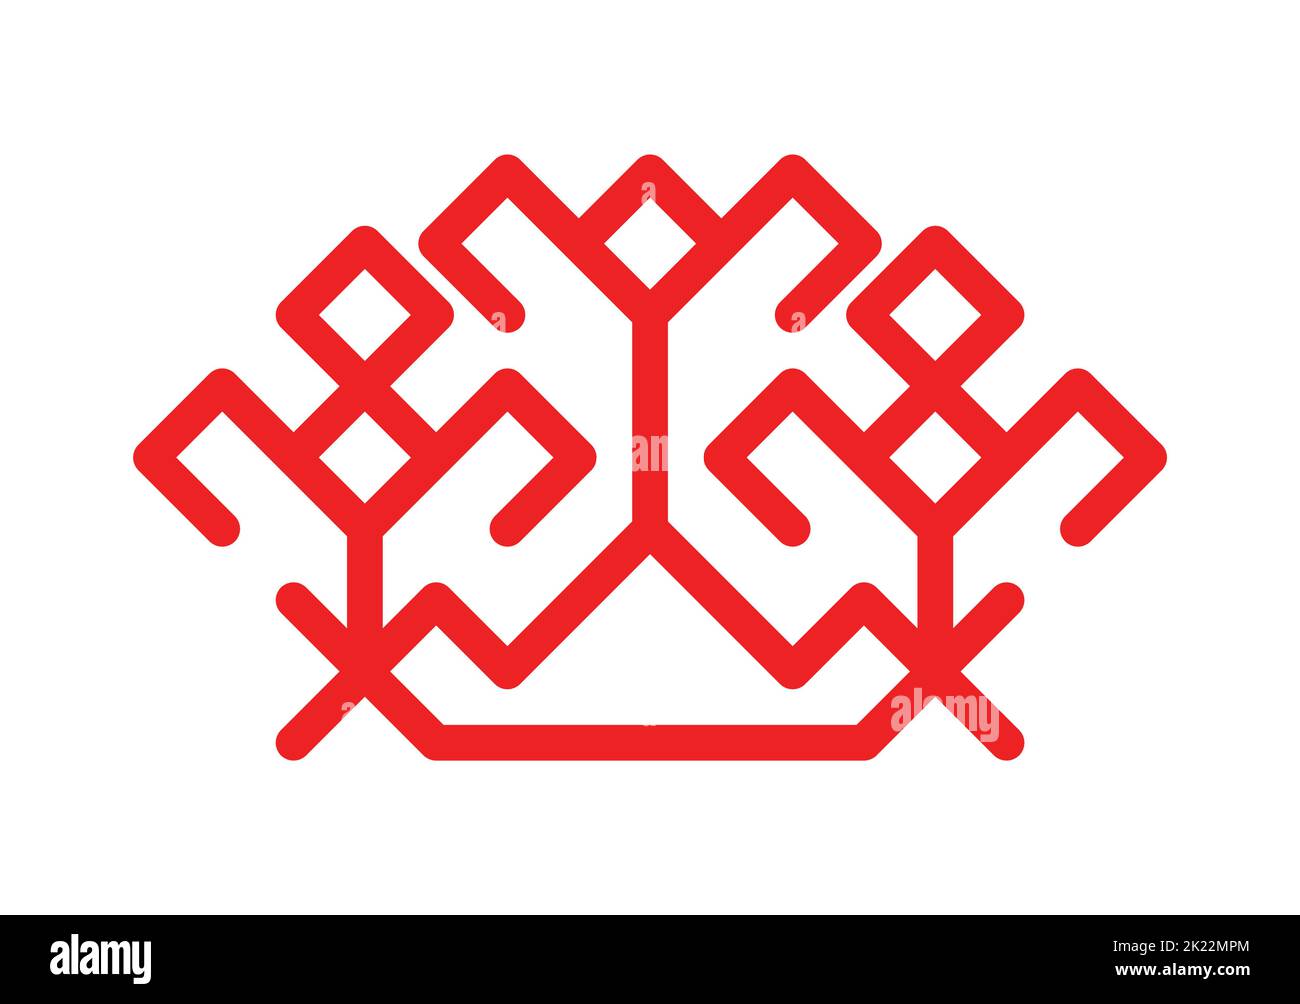 Vector isolated illustration. Red simplified Finnish symbol of bush with berries. Outline icon of flowers and shrub is national Karelian ornamental el Stock Vector